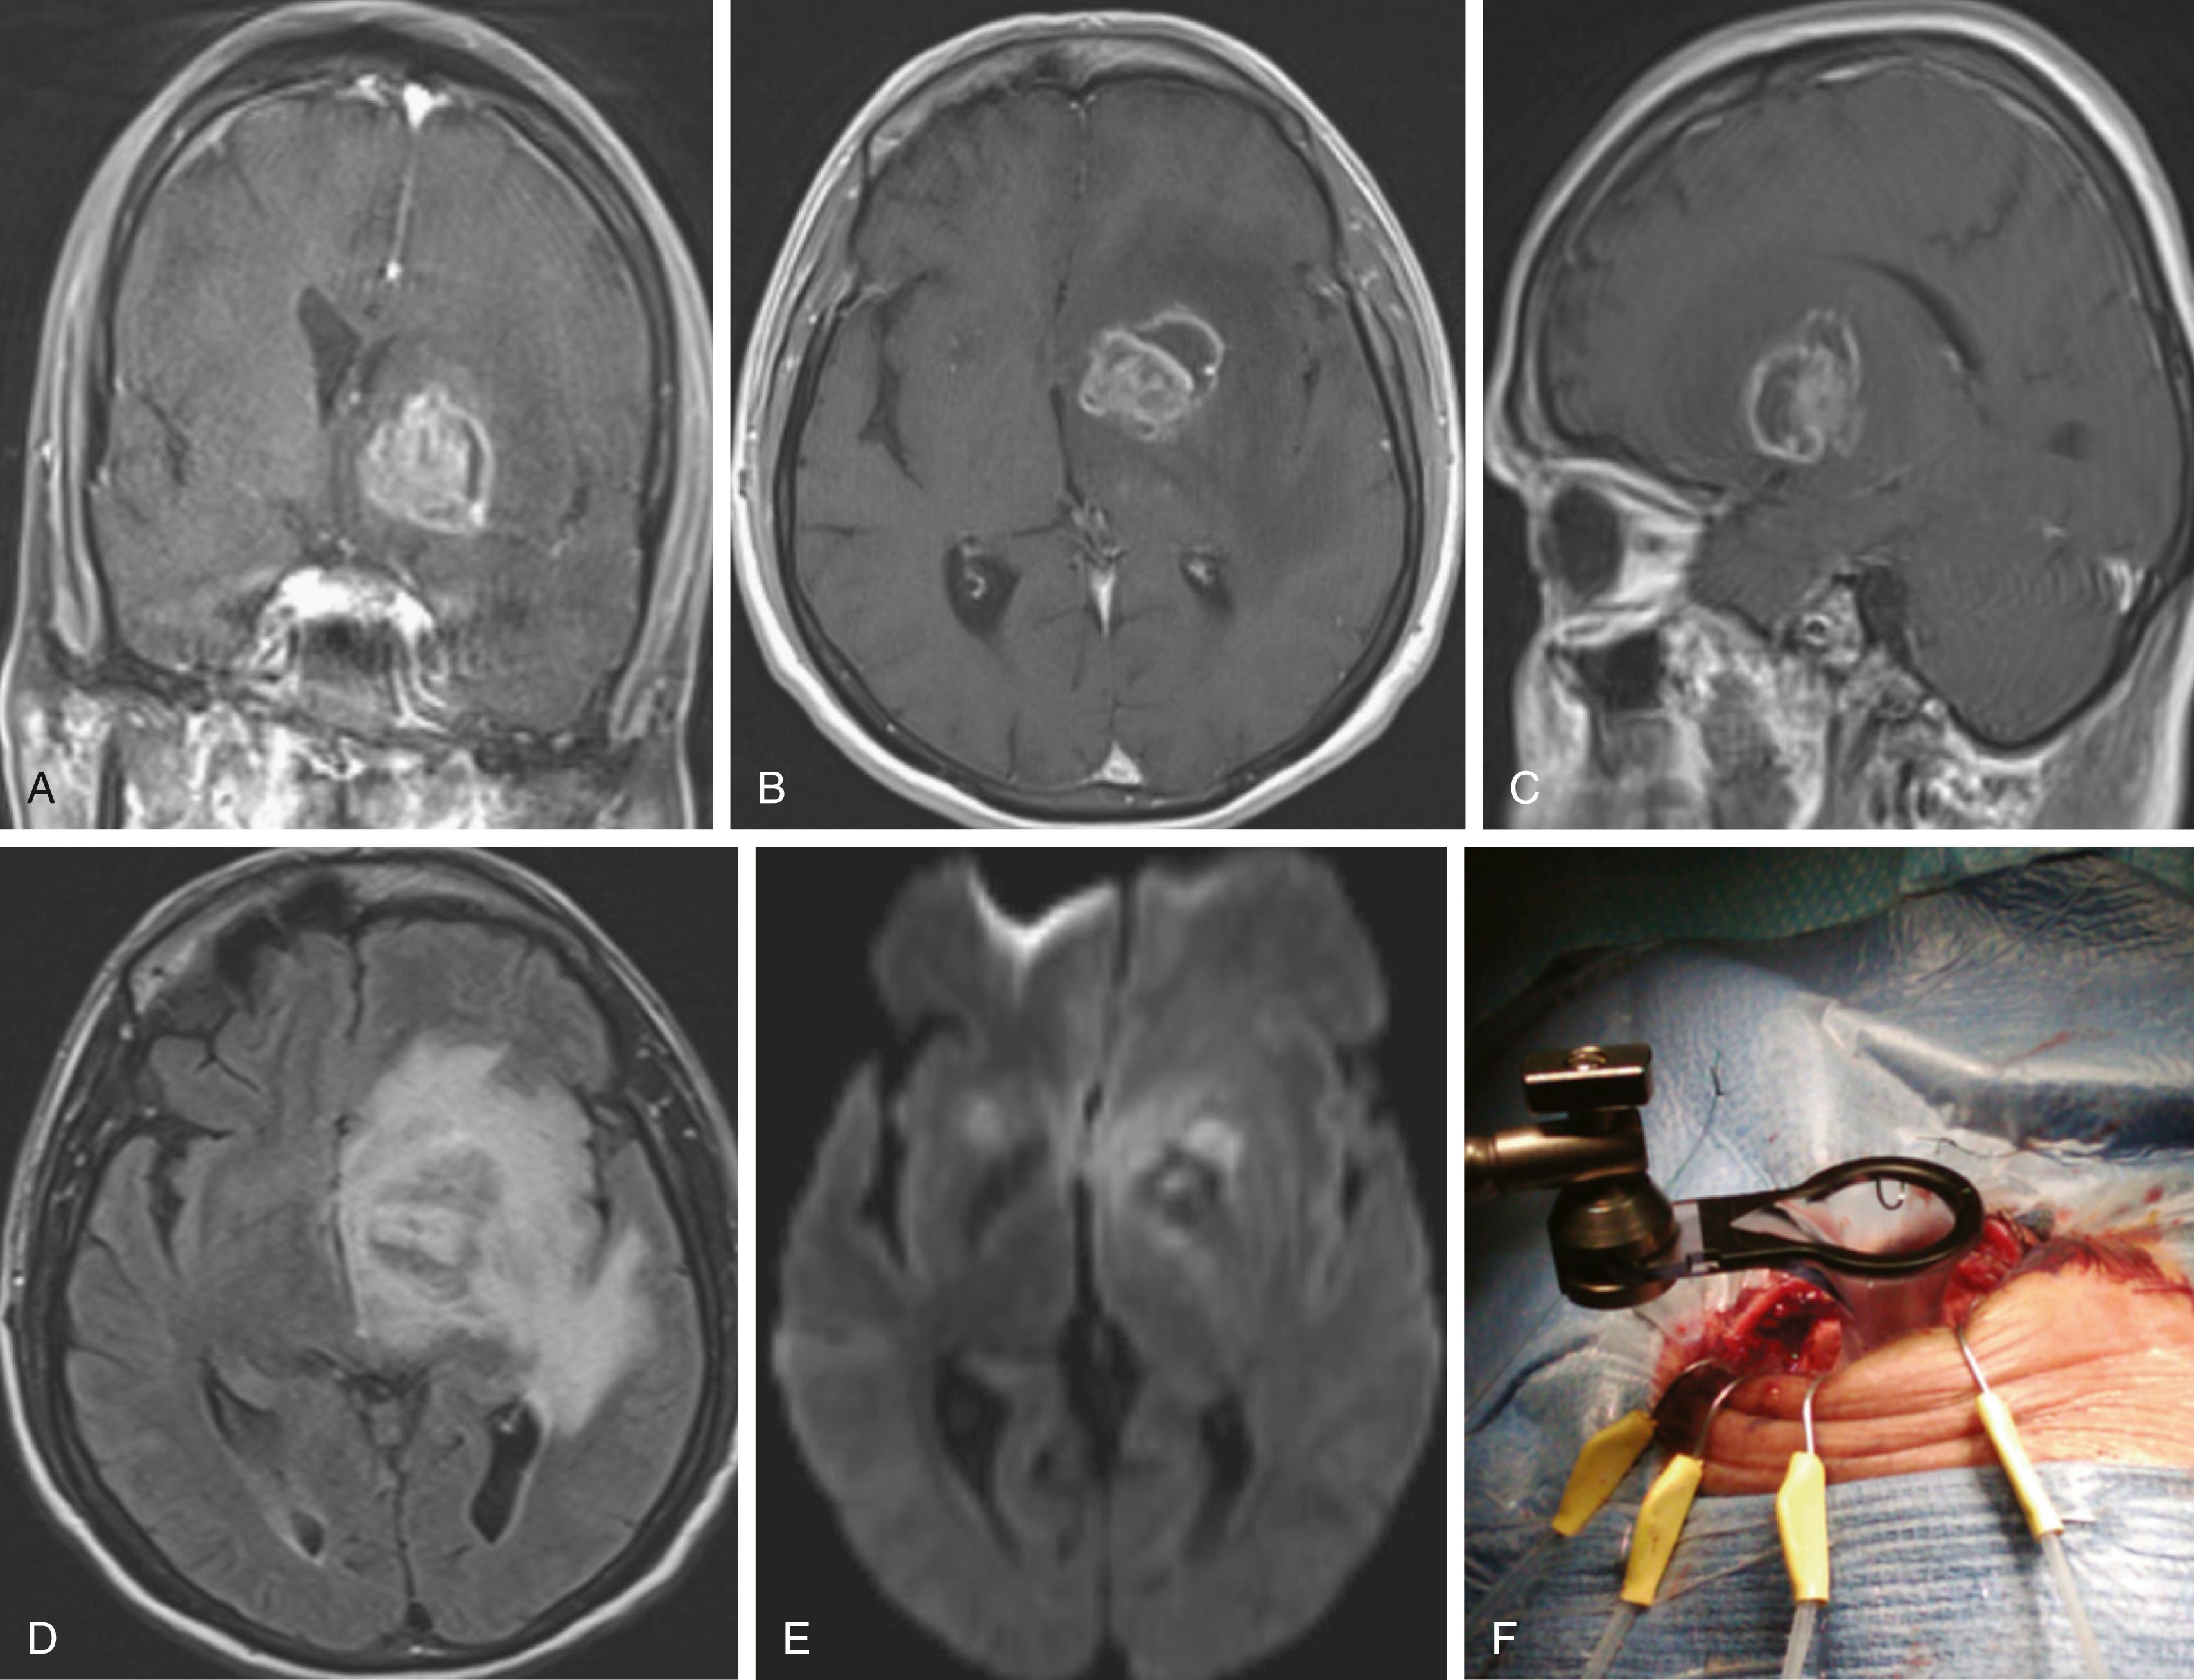 FIGURE 128.3, This 40-year-old man has a history of HIV, a CD4 count of 4, disseminating histoplasmosis, and Pneumocystis carinii pneumonia. He presented with a 2-week history of confusion and speech difficulties consistent with expressive and receptive aphasia. Preoperative MRI coronal (A), axial (B), and sagittal (C) T1-weighted images with contrast revealed an enhancing lesion on the area of the left basal ganglia with edema and mass effect. (D) An axial fluid-attenuated inversion recovery (FLAIR) image revealed mass effect and edema. (E) A diffusion-weighted signal revealed restricted diffusion within irregular areas and parts of the lesion. The patient was taken to the operating room. (F) A left-sided supraorbital craniotomy with frameless surgical navigation was conducted to approach the dominant hemispheric lesion. The cultures revealed toxoplasmic encephalitis, and the patient was treated with an 8-week course of leucovorin, pyrimethamine, and sulfadiazine.